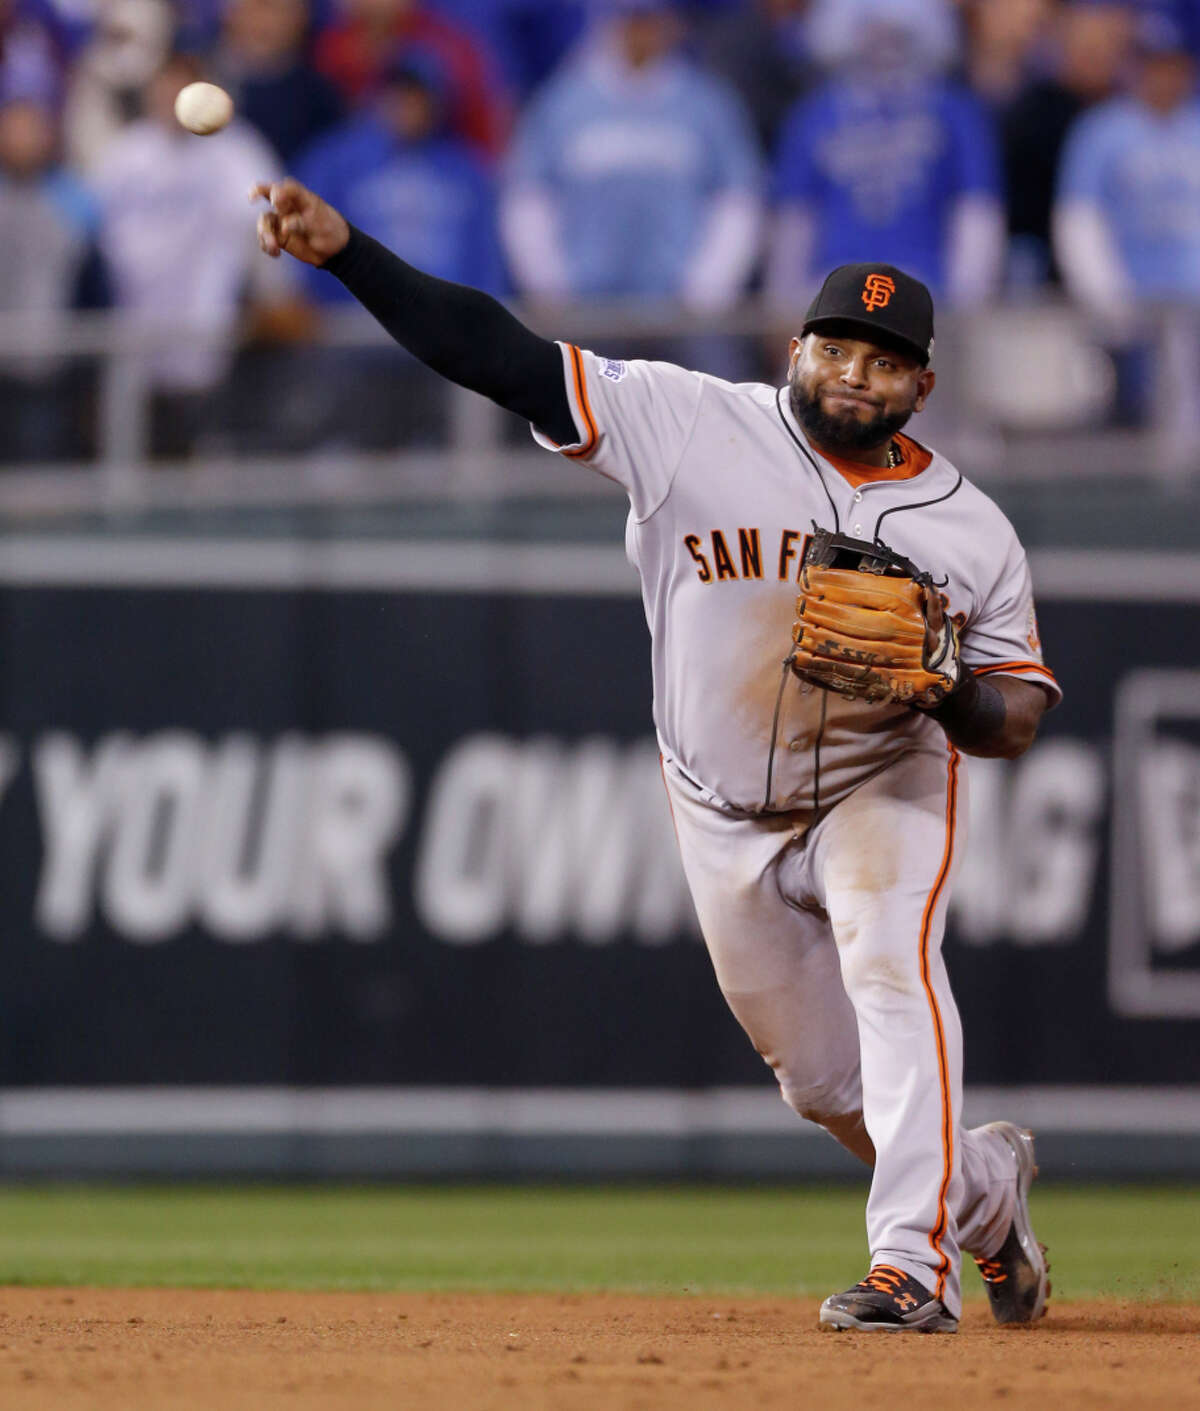 If Pablo Sandoval doesn’t return, the Giants’ options for replacing him at third base appear to be limited.